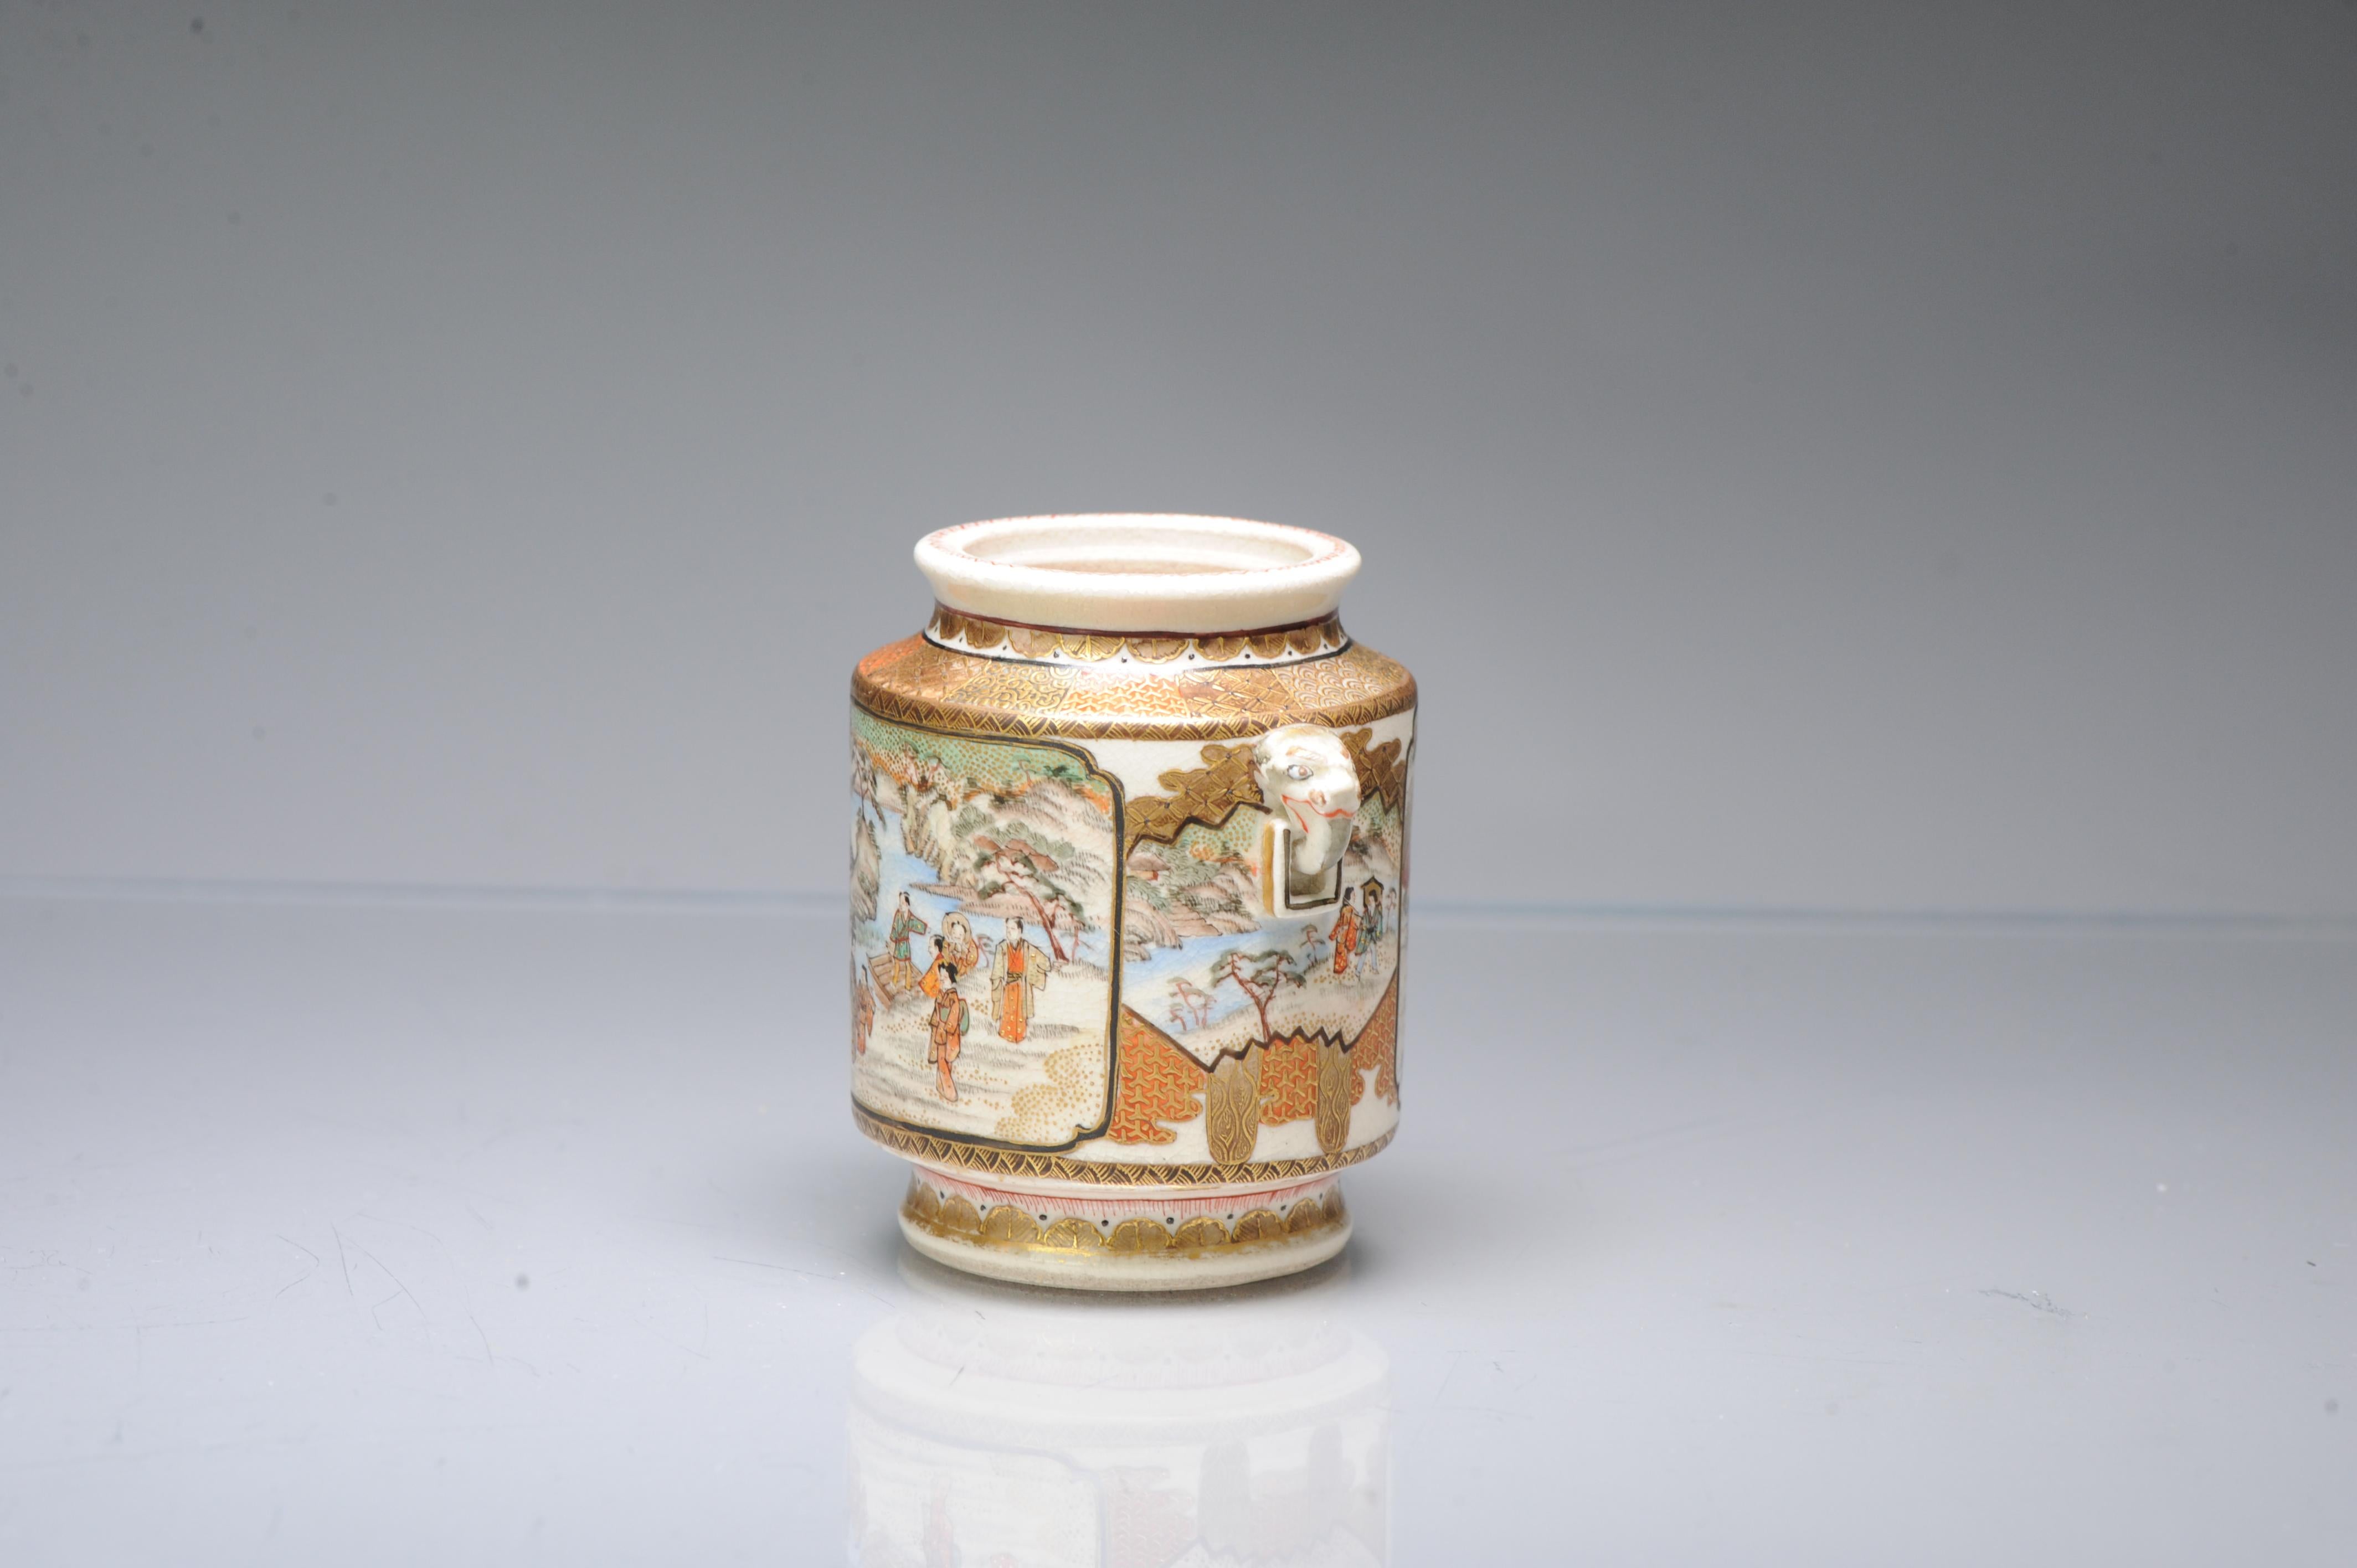 Description

Sharing with you is this nice satsuma jar decorated with figures beside a river and working on the land. Elephant handles.

Lid seems missing.

Condition

Overall Condition Perfect. Size 75mm high

Period

Meiji Periode